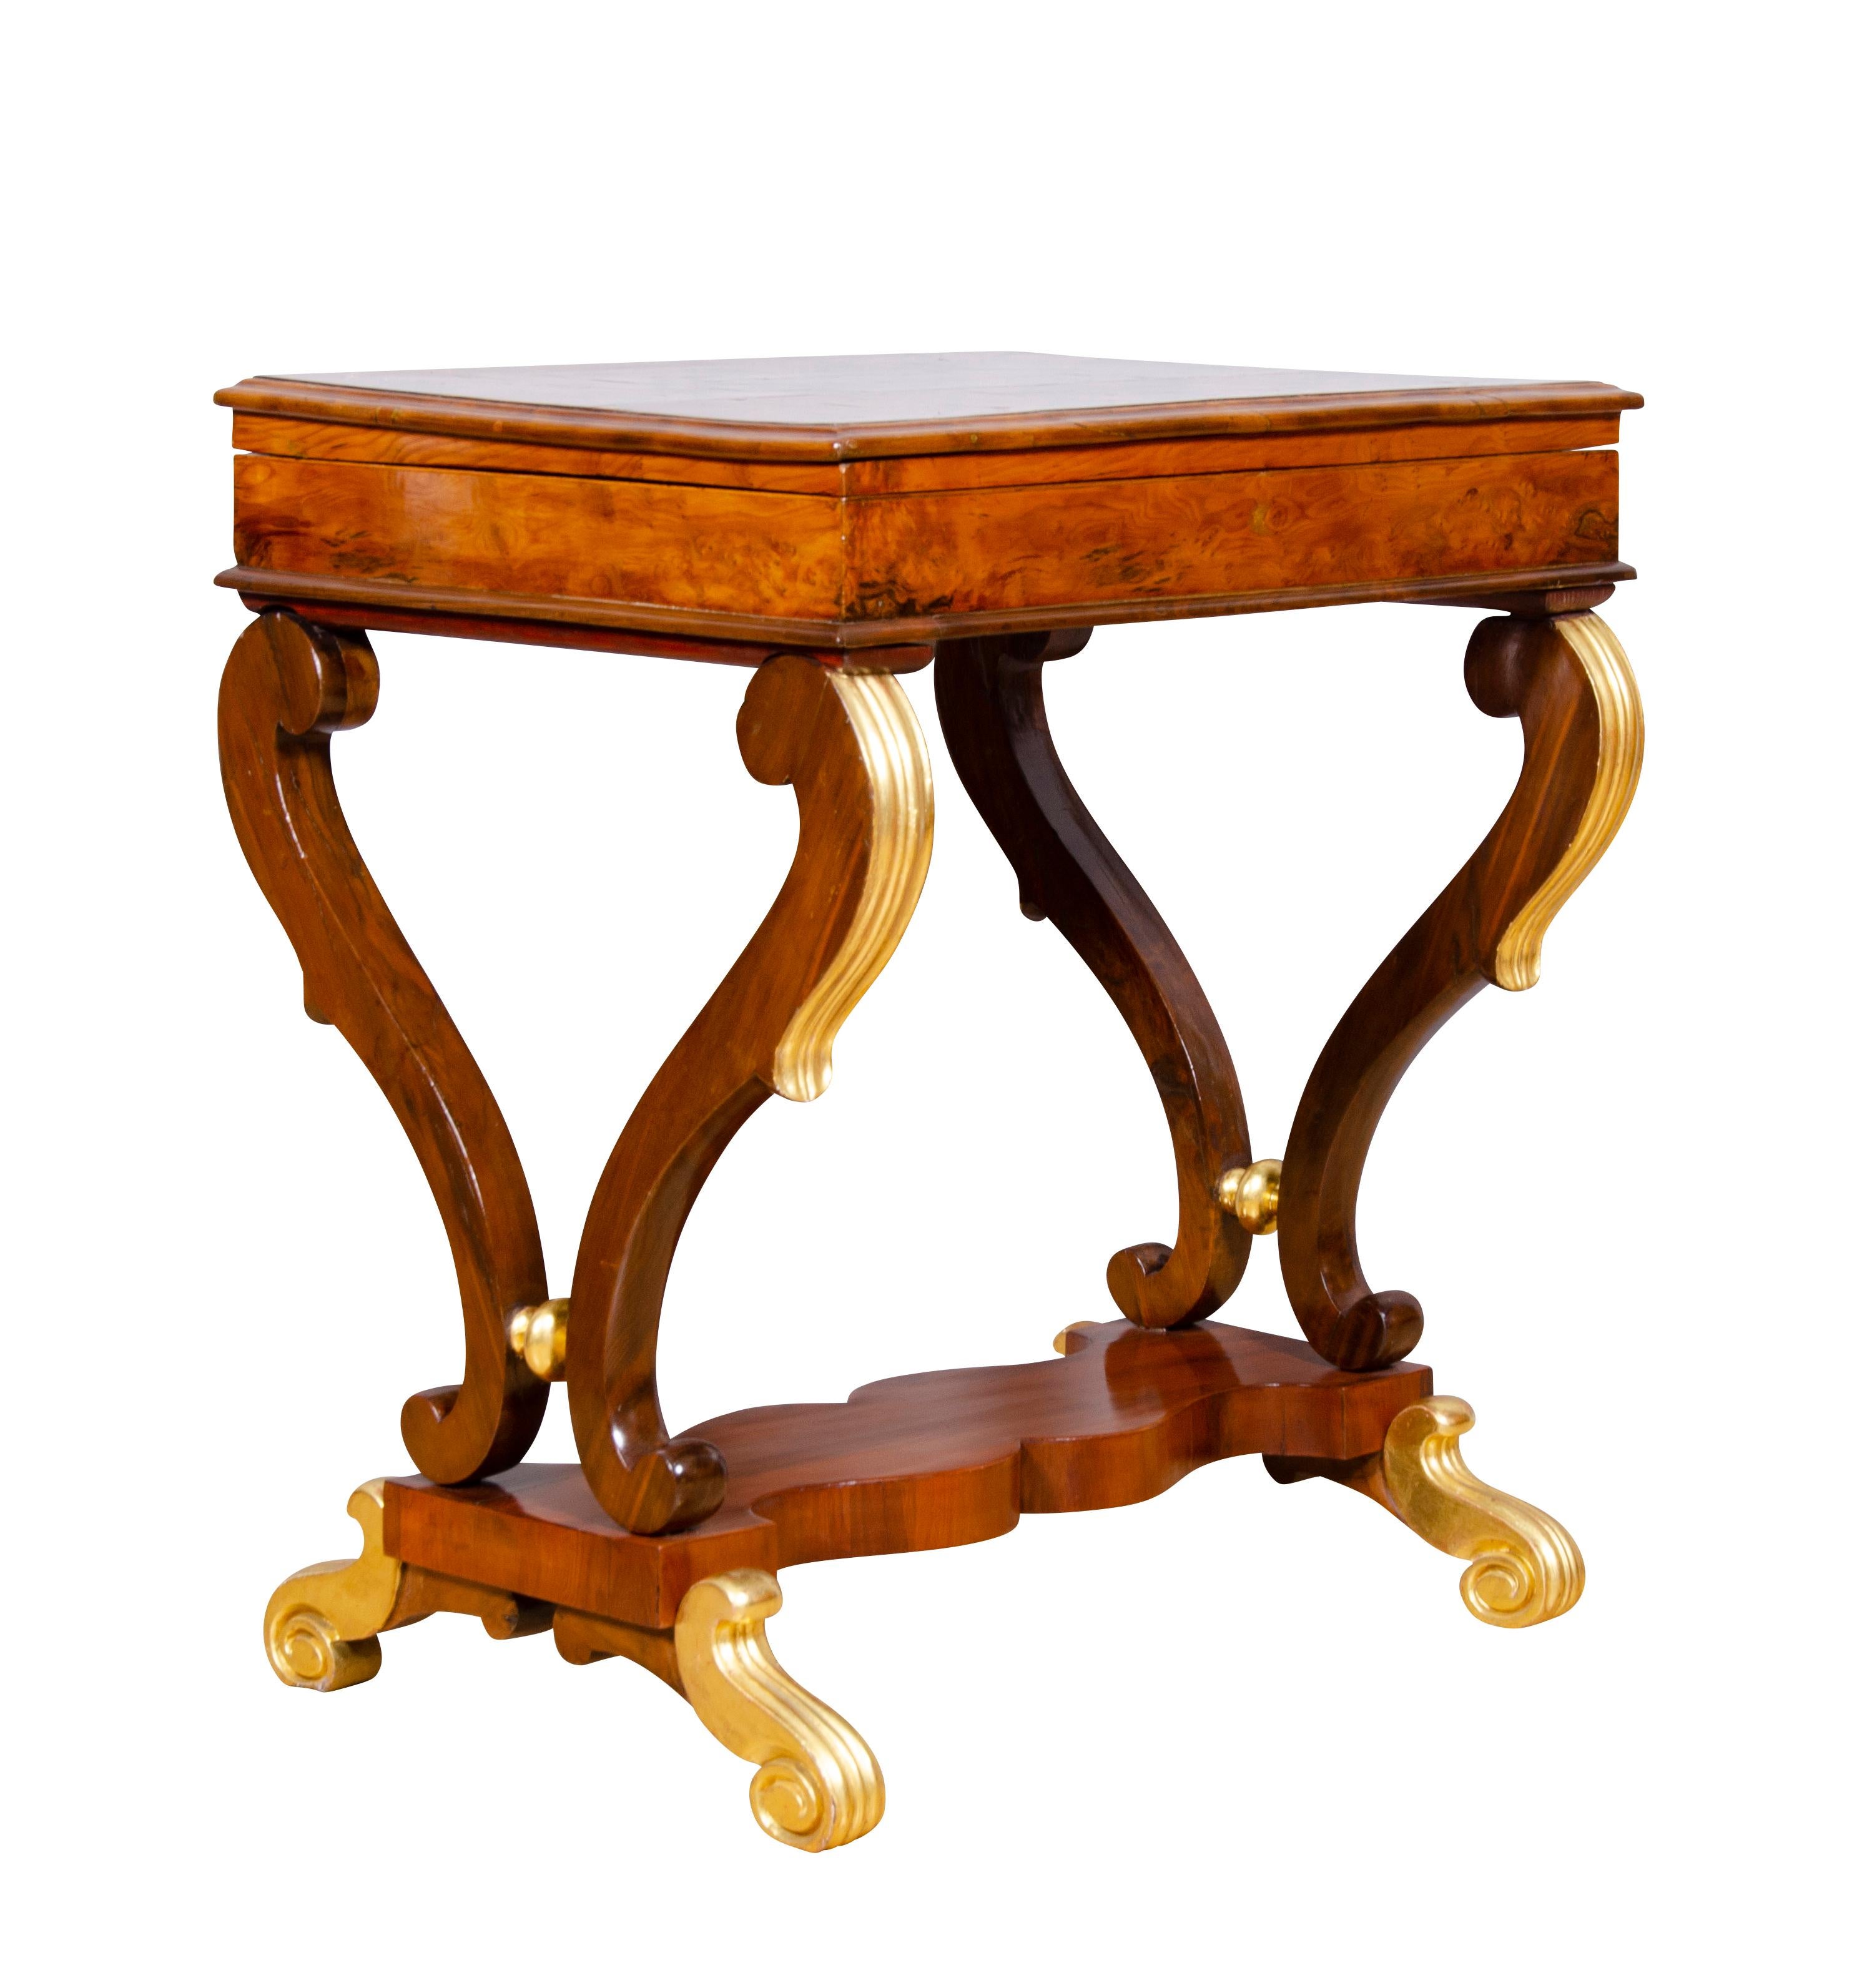 European Baltic Neoclassic Yew Wood Games Table For Sale